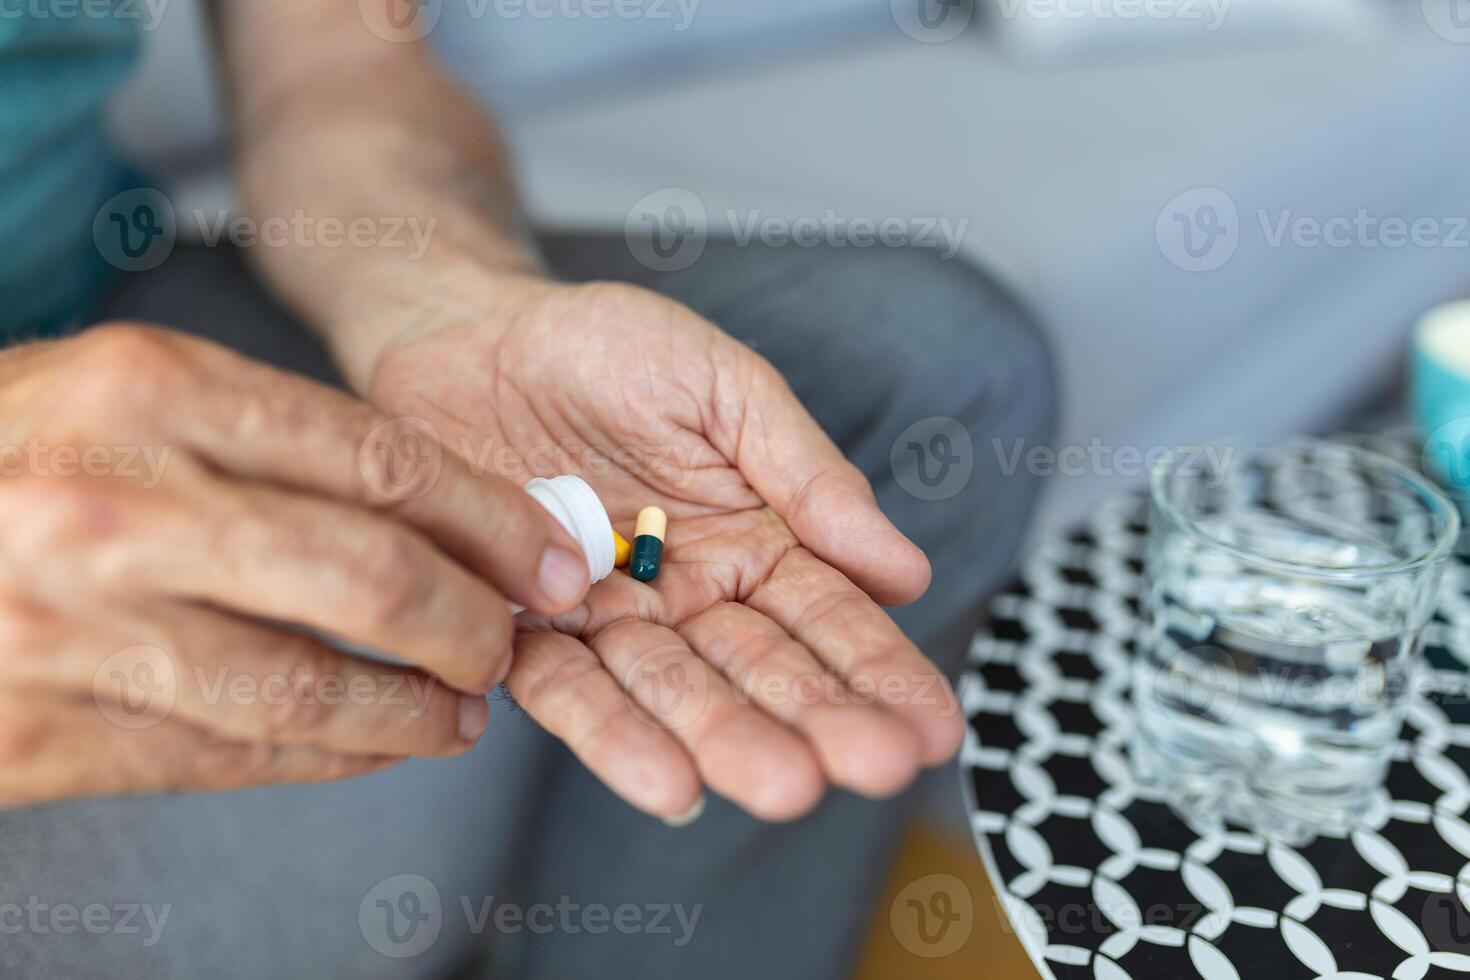 Senior man takes pill with glass of water in hand. Stressed mature man drinking sedated antidepressant meds. Man feels depressed, taking drugs. Medicines at work photo